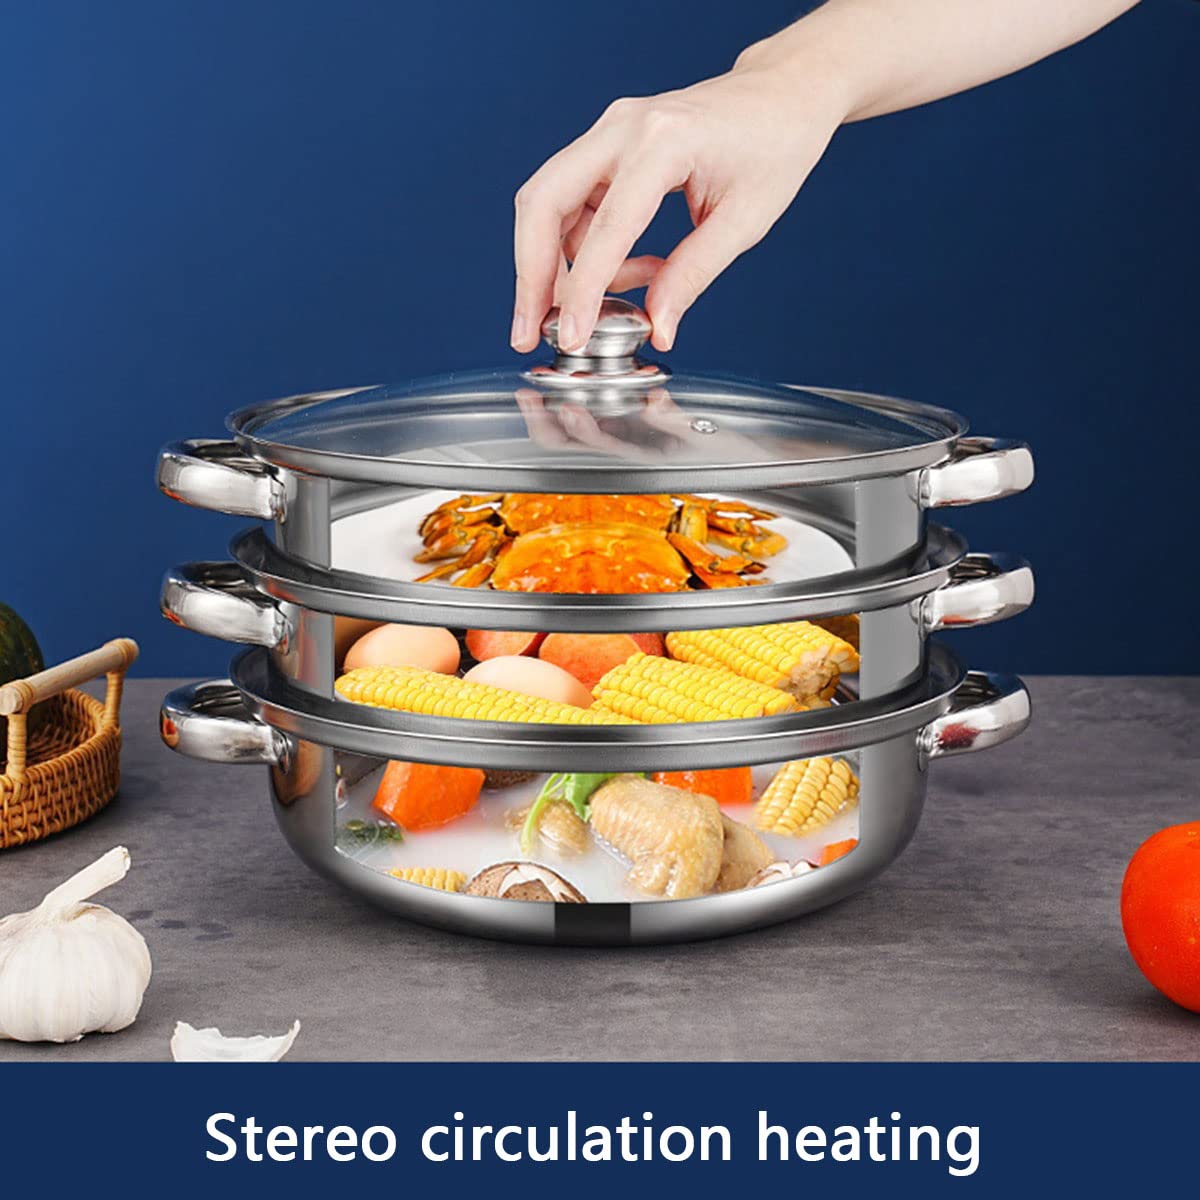 Steamer Pot for Cooking 11 inch, Steam Pots with Lid 2-tier Multipurpose Stainless Steel Steaming Pot Cookware with Handle for Vegetable